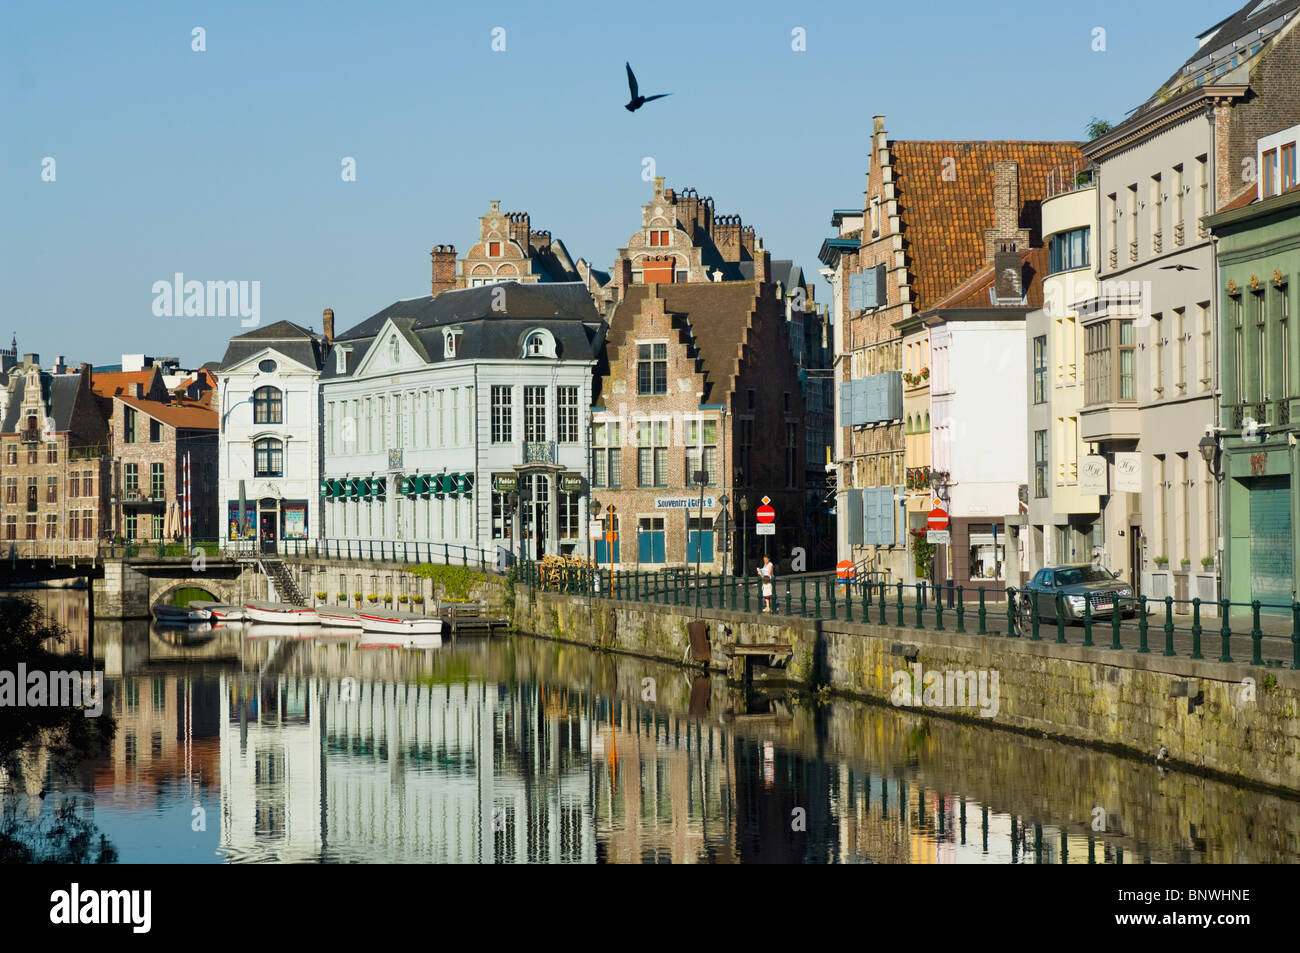 Belgium, Ghent, Ghent canal houses Stock Photo